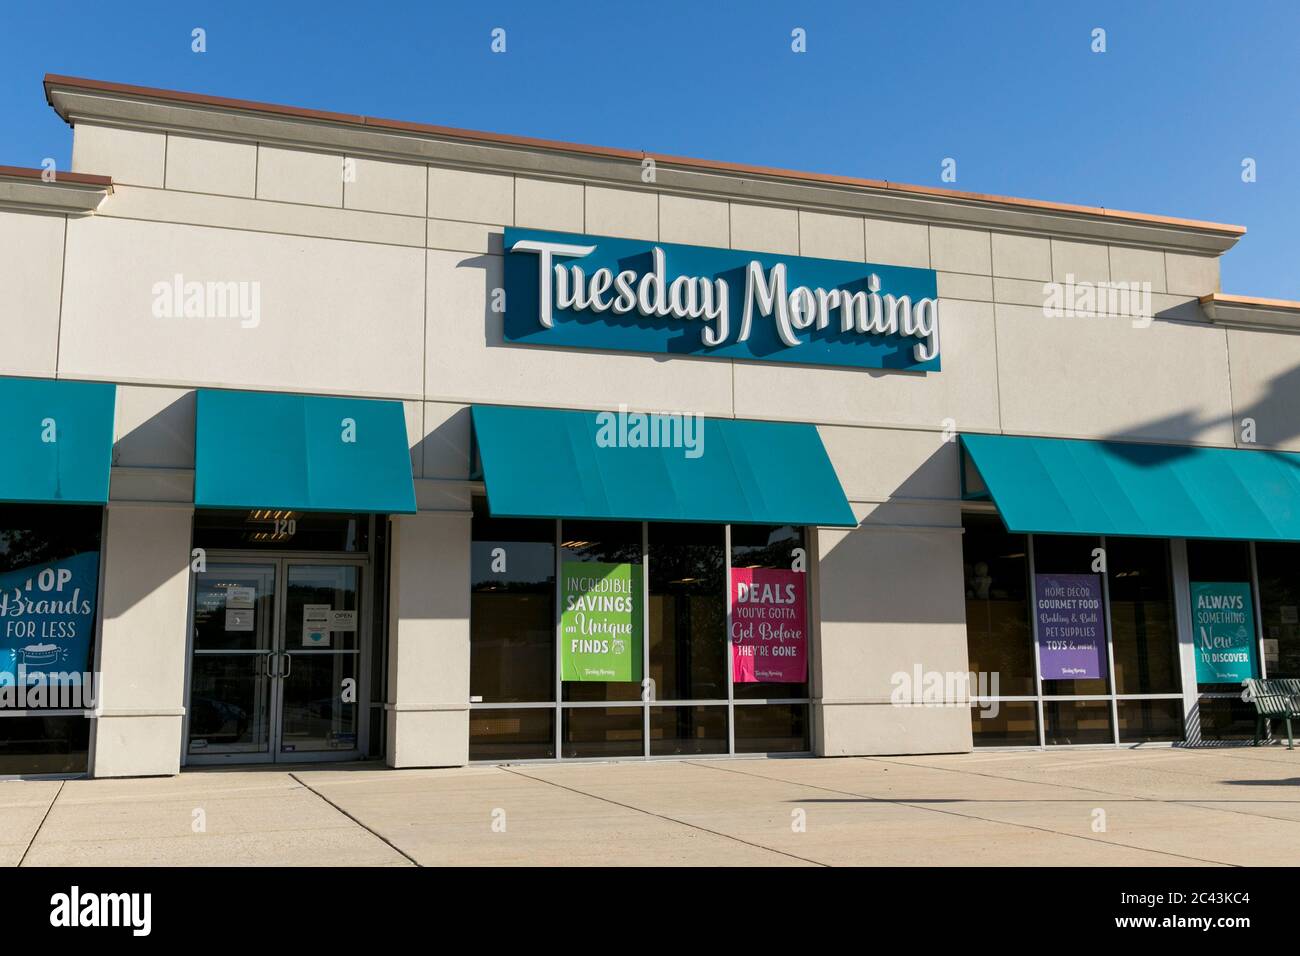 A logo sign outside of a Tuesday Morning retail store location in Bowie, Maryland on June 8, 2020. Stock Photo